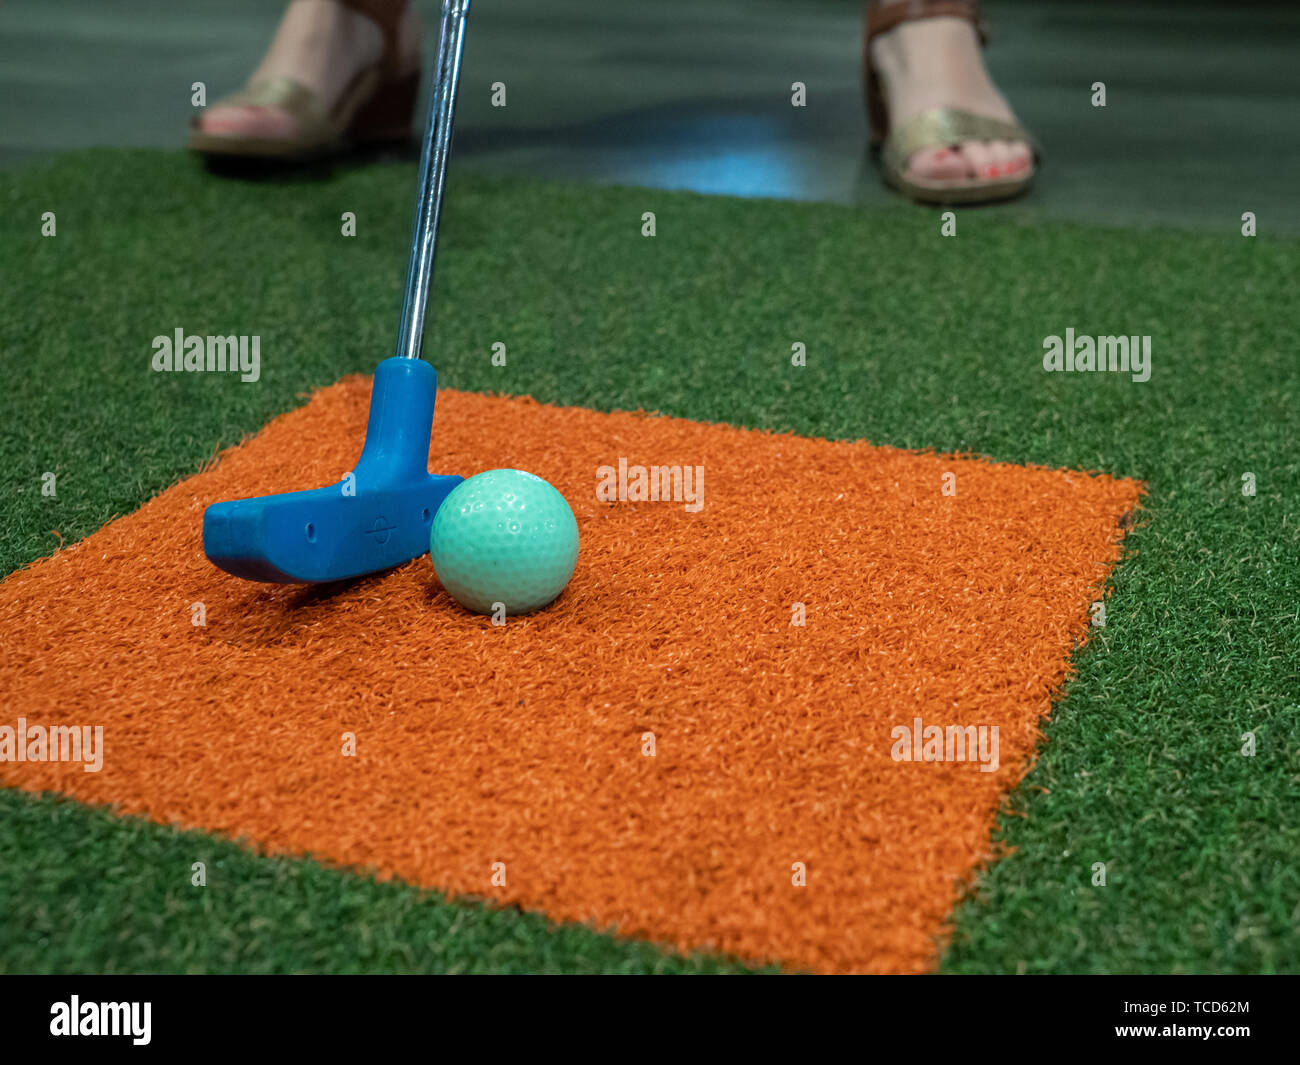 Blue putter on turf next to green golf ball on miniature golf course with woman hitting Stock Photo